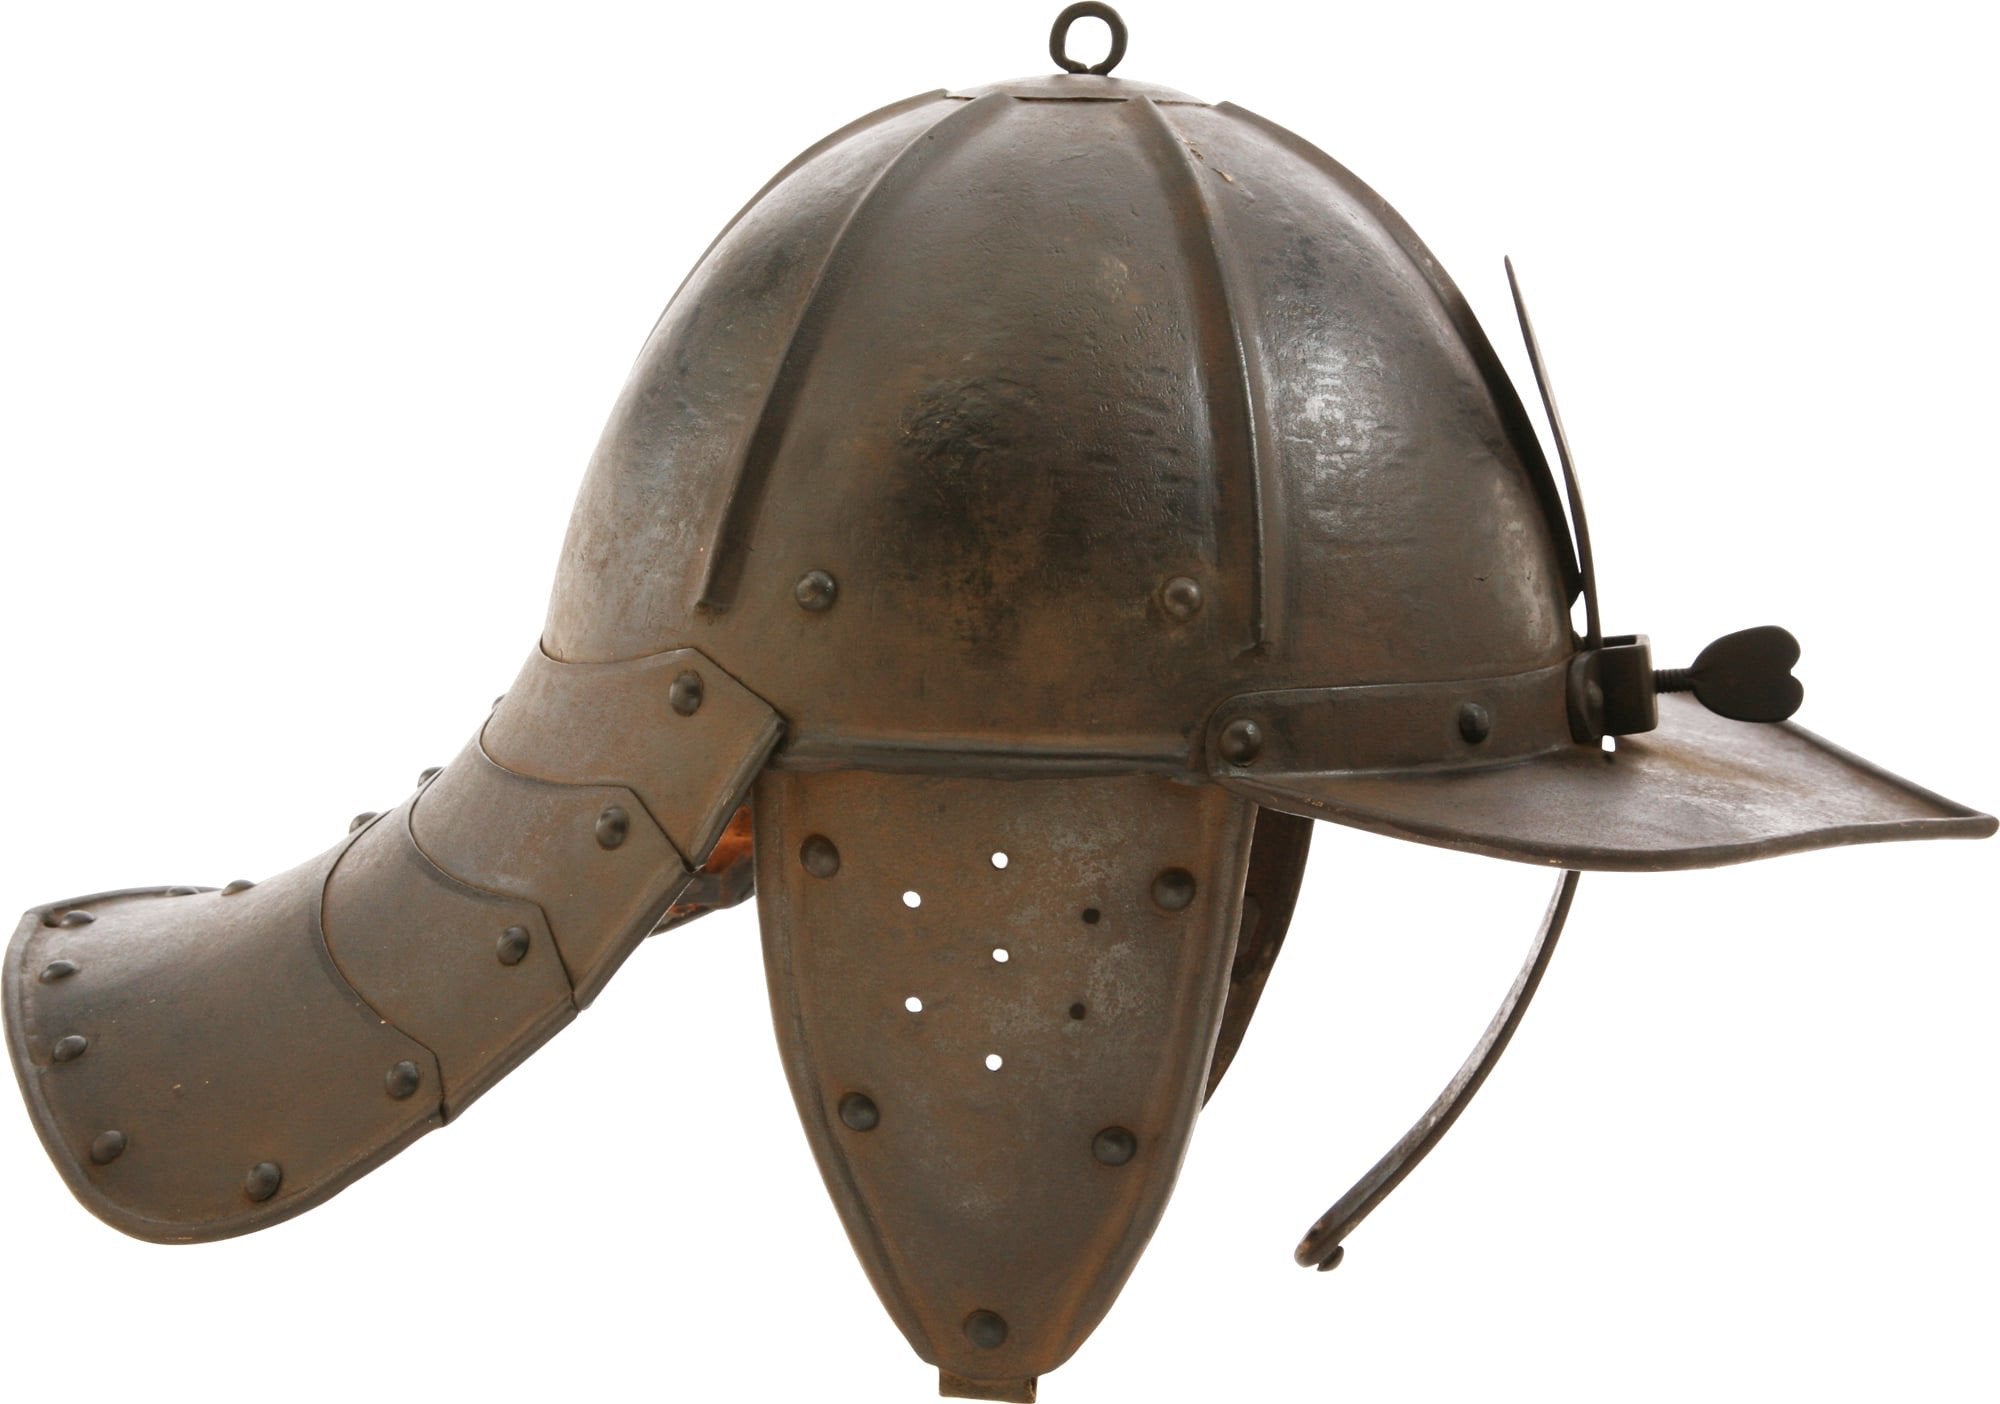 Evidently served in two wars for 35 years! EUROPEAN LOBSTERTAIL HELMET C.1620 - Fagan Arms